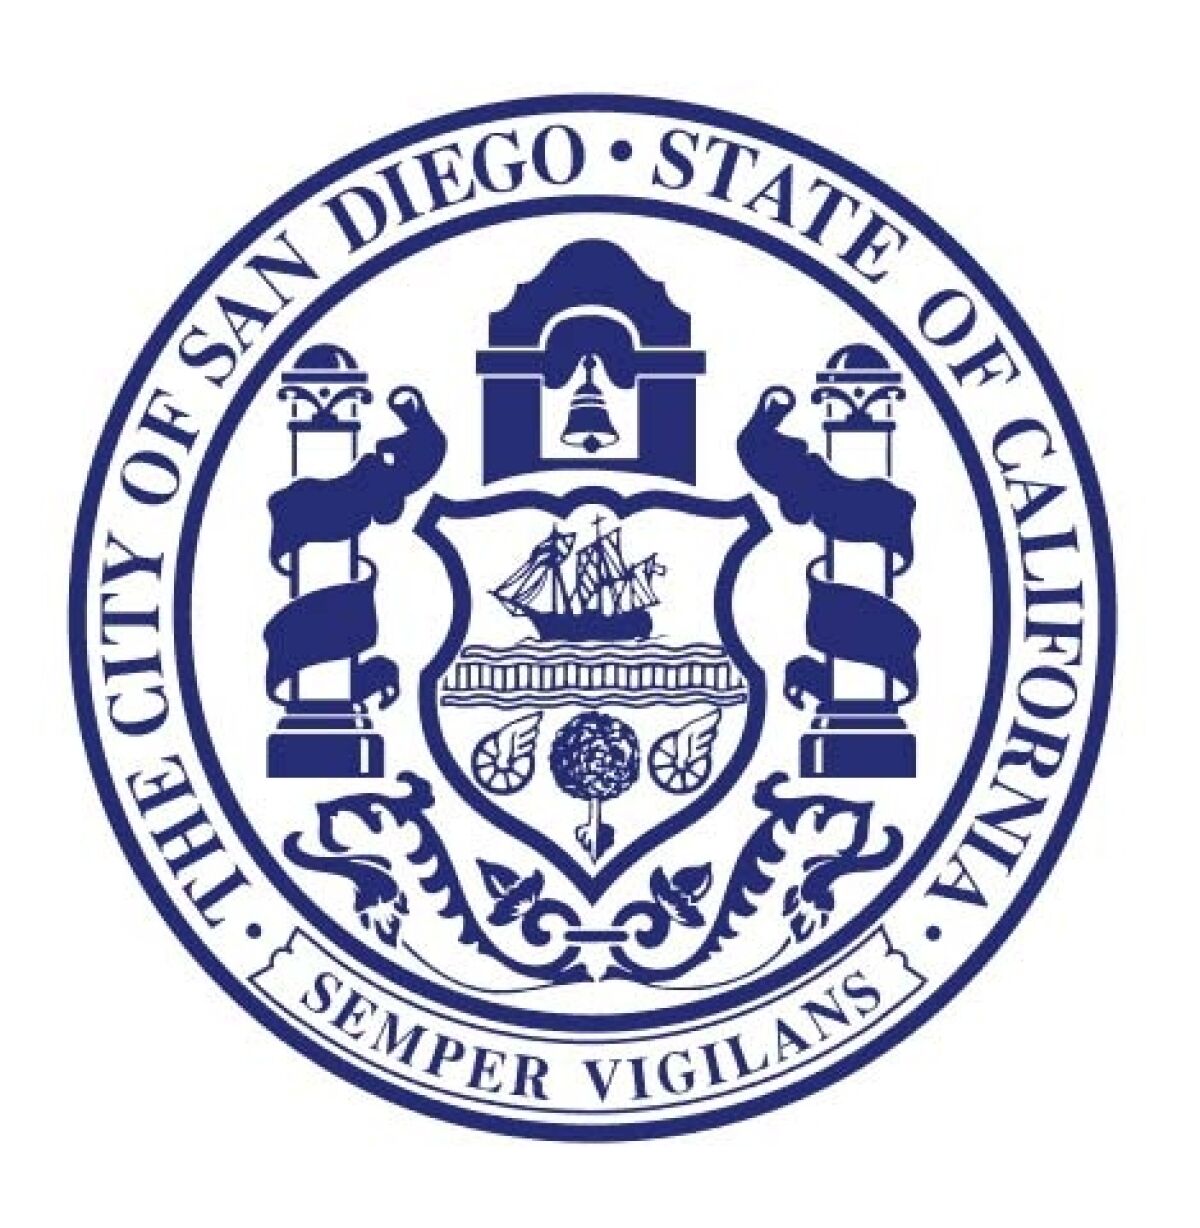 The San Diego city seal was designed by architect Carleton Monroe Winslow and was adopted in 1914.